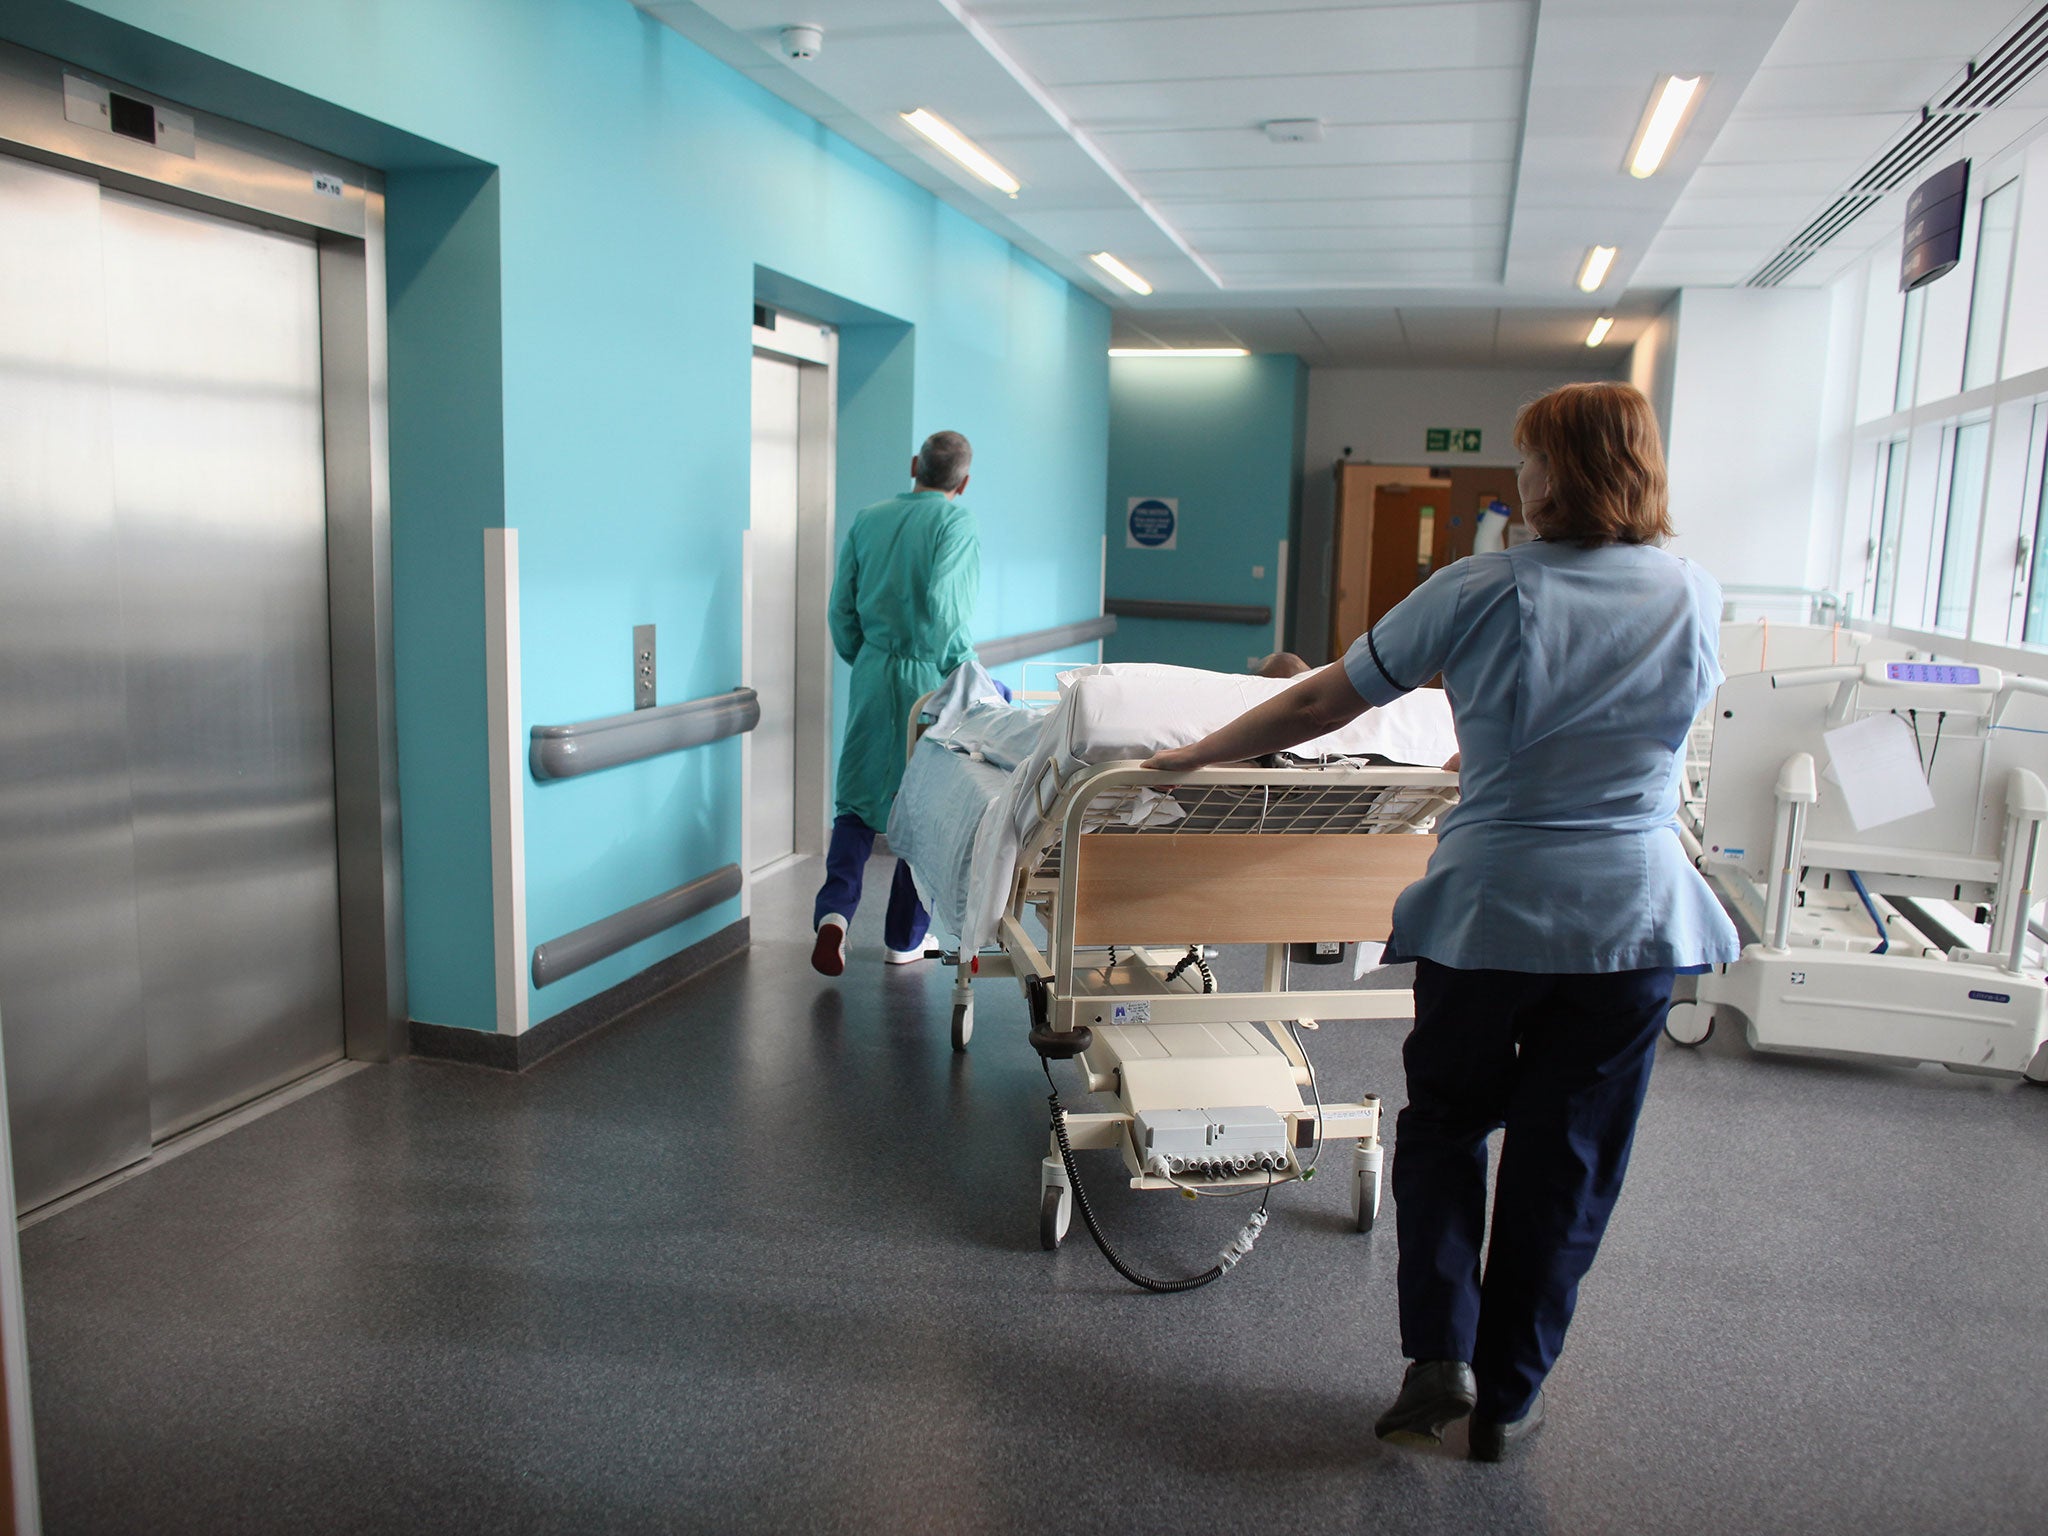 A patient is taken to the operating theatre at Birmingham Queen Elizabeth Hospital